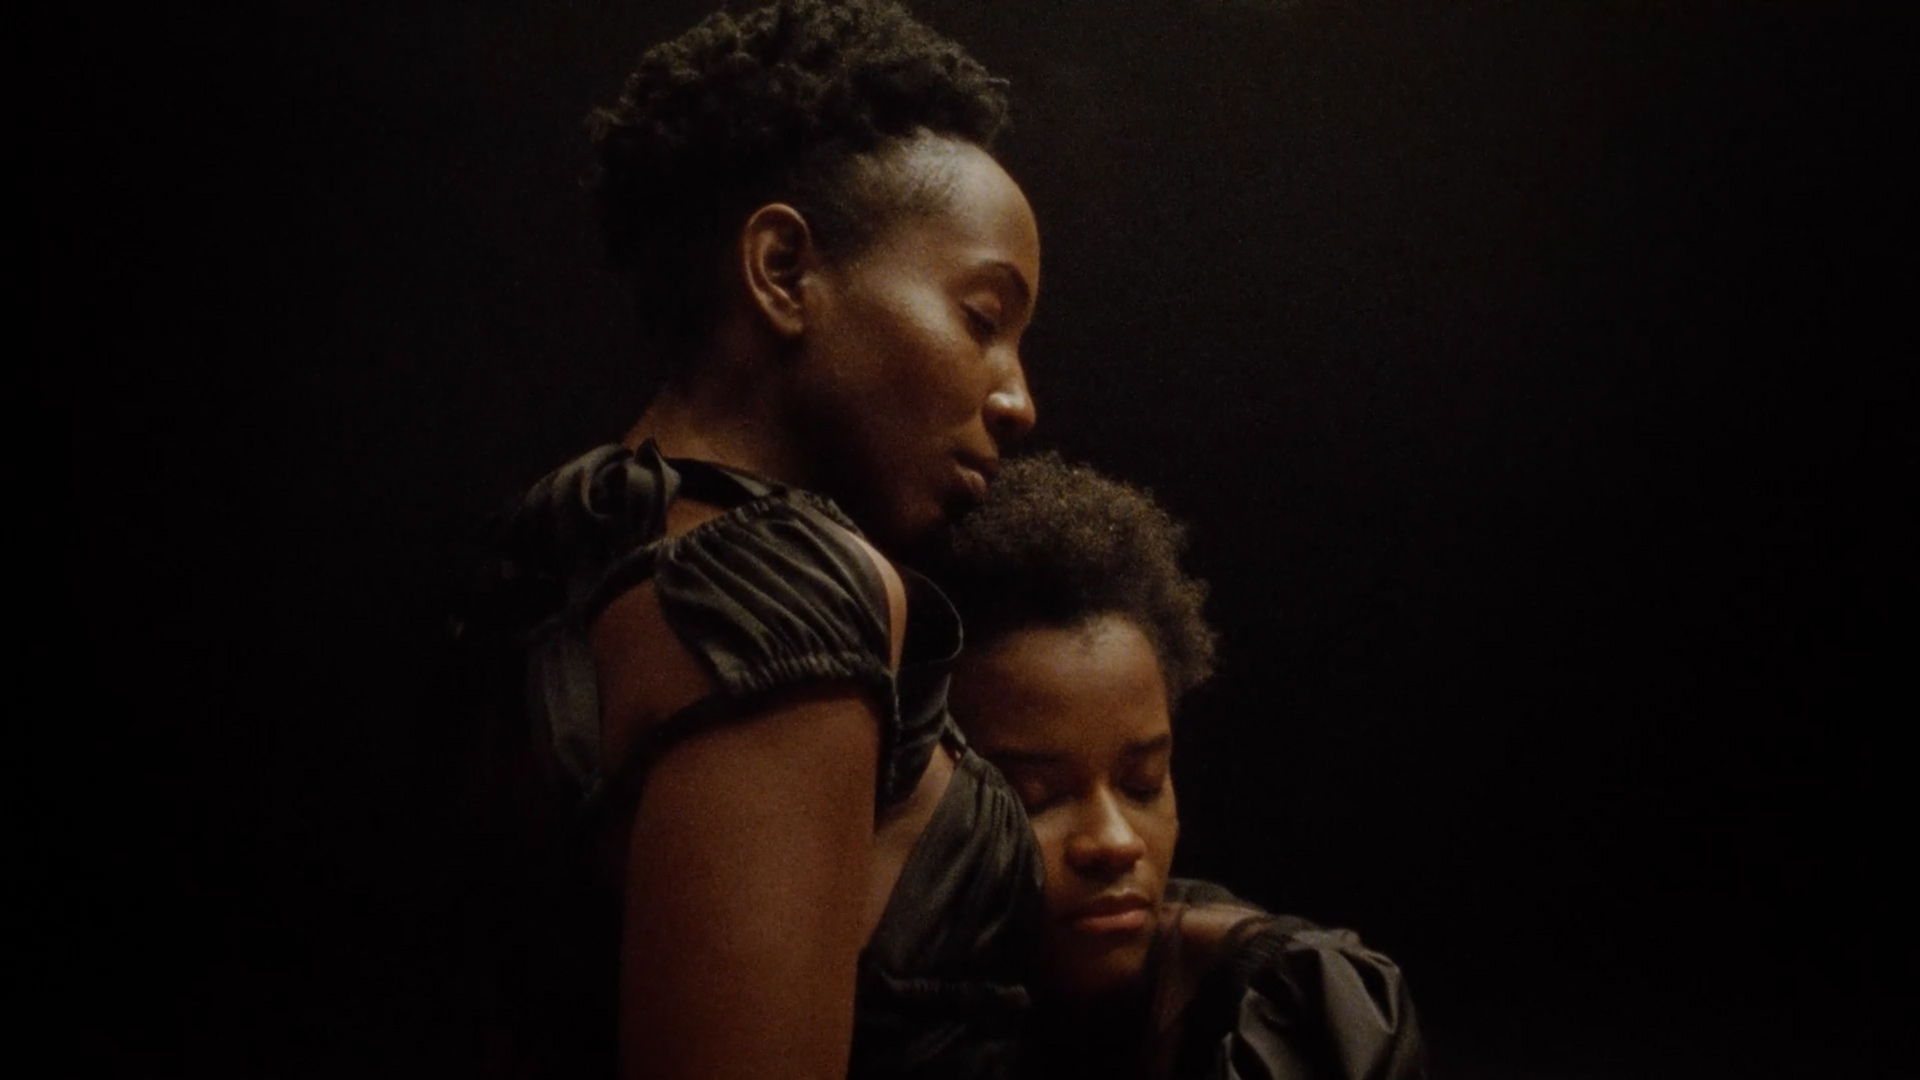 Silent Twins (A Poem by Letitia Wright and Tamara Lawrance)